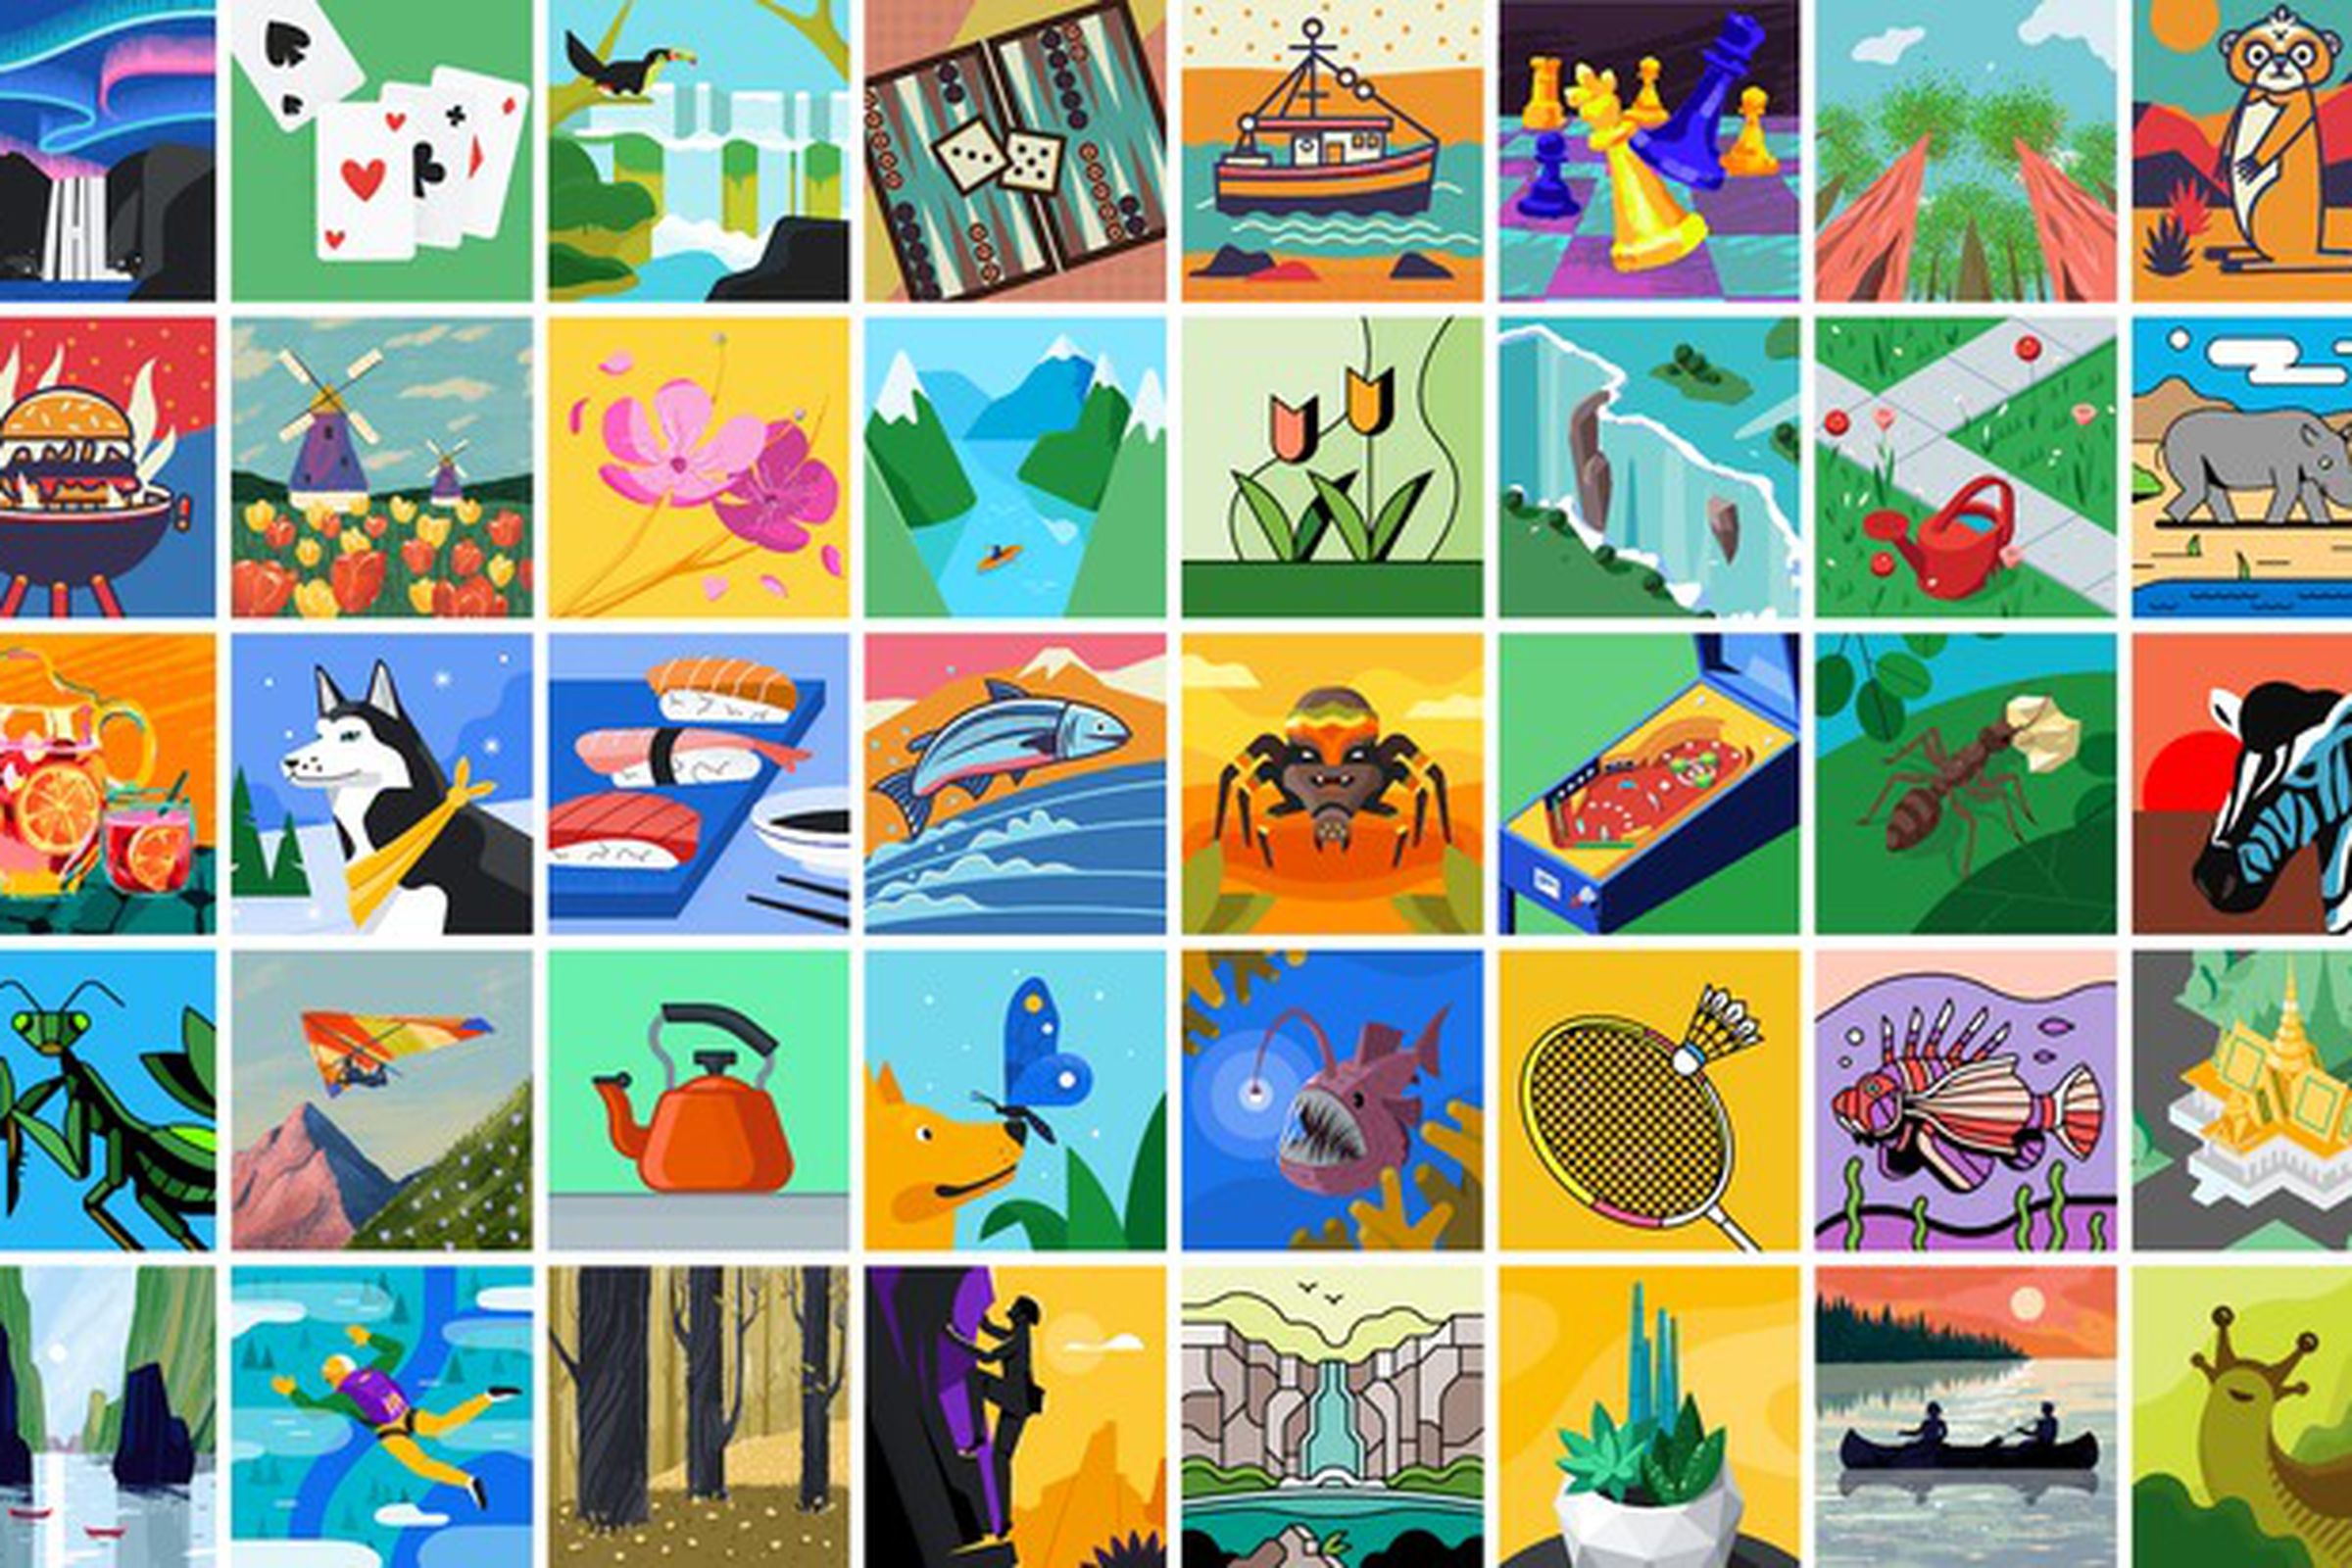 Some of Google’s new illustrations